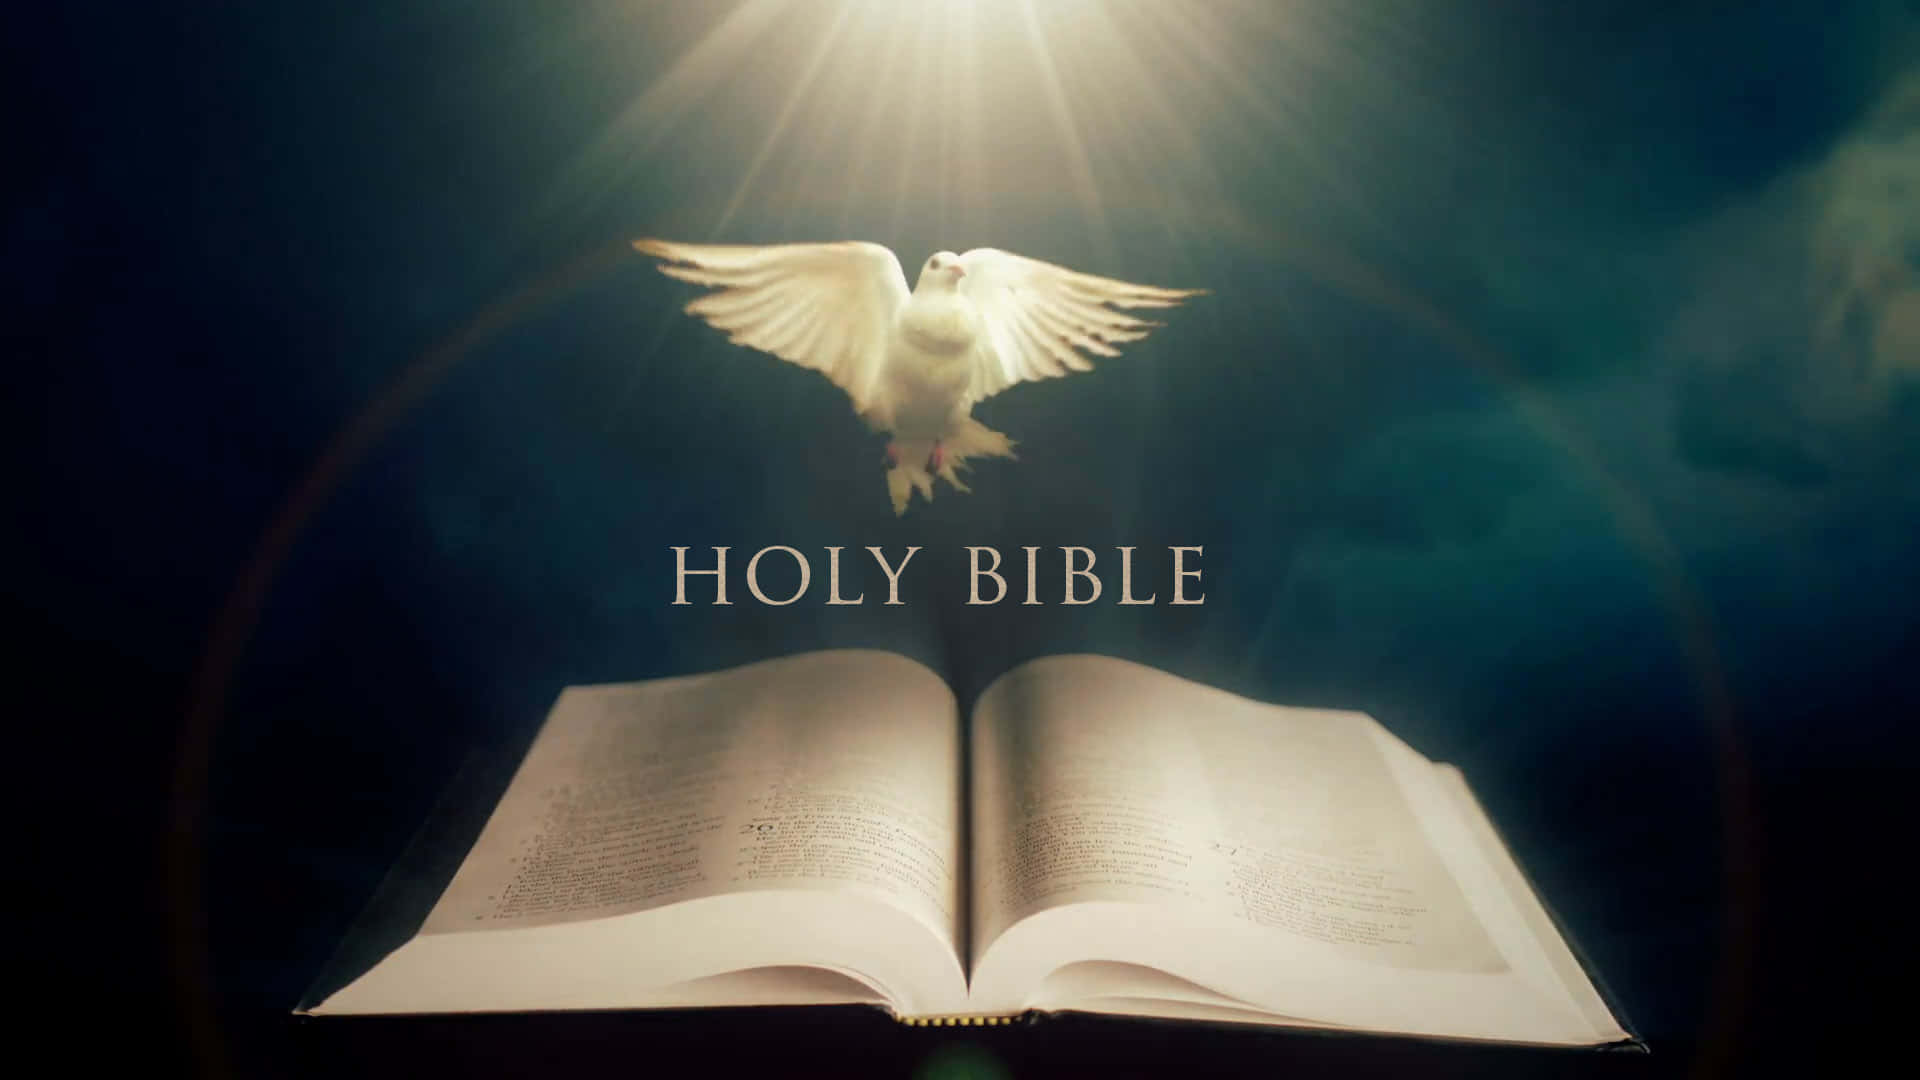 Free Holy Bible Background, Holy Bible Background s for FREE